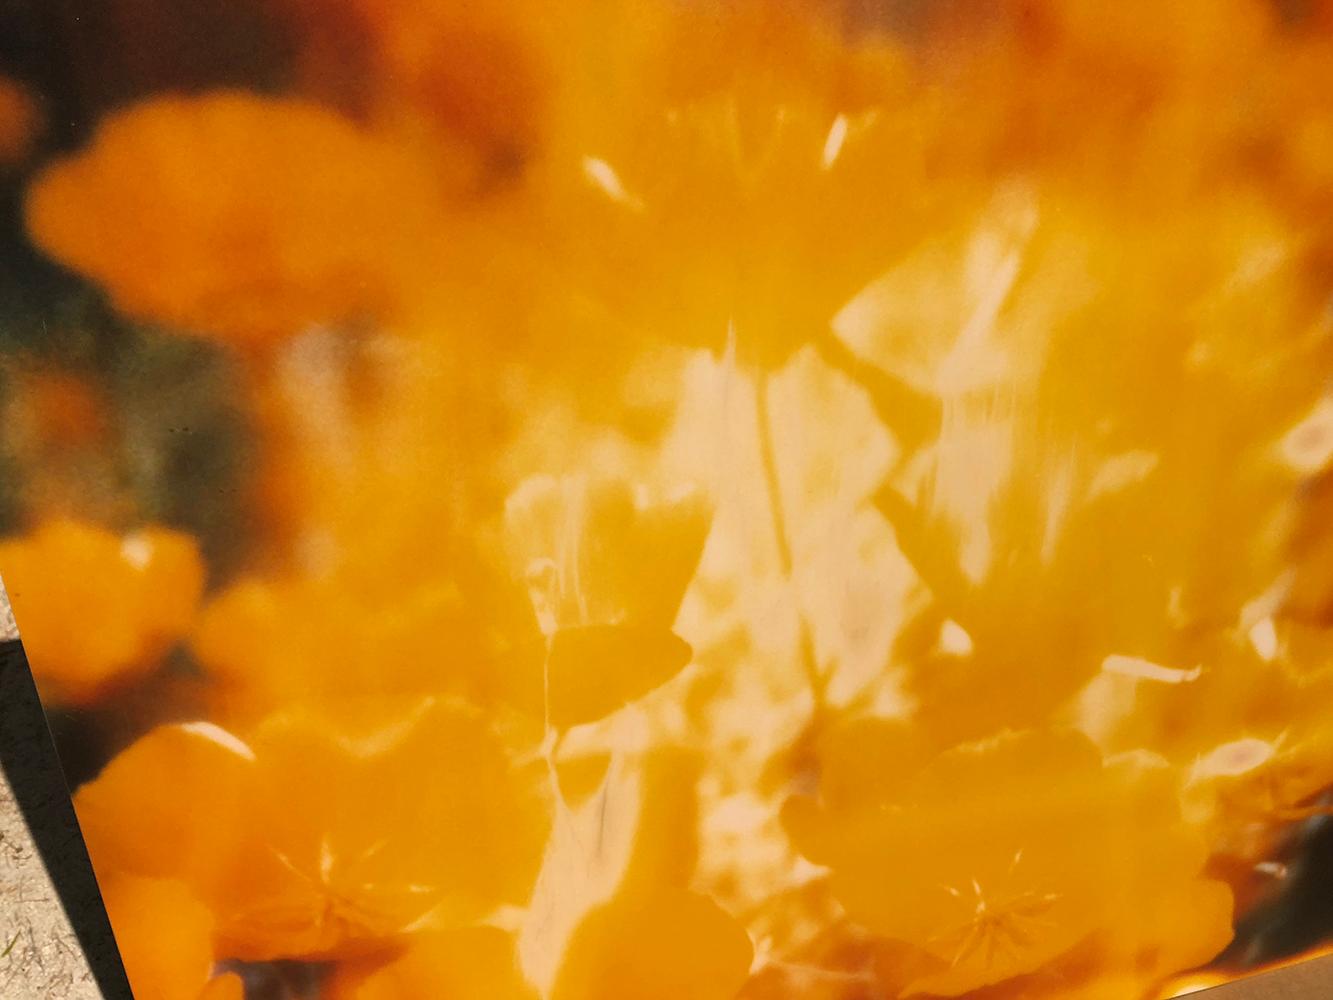 Yellow Flower (The Last Picture Show) analog, 128x126cm, mounted - Contemporary Photograph by Stefanie Schneider